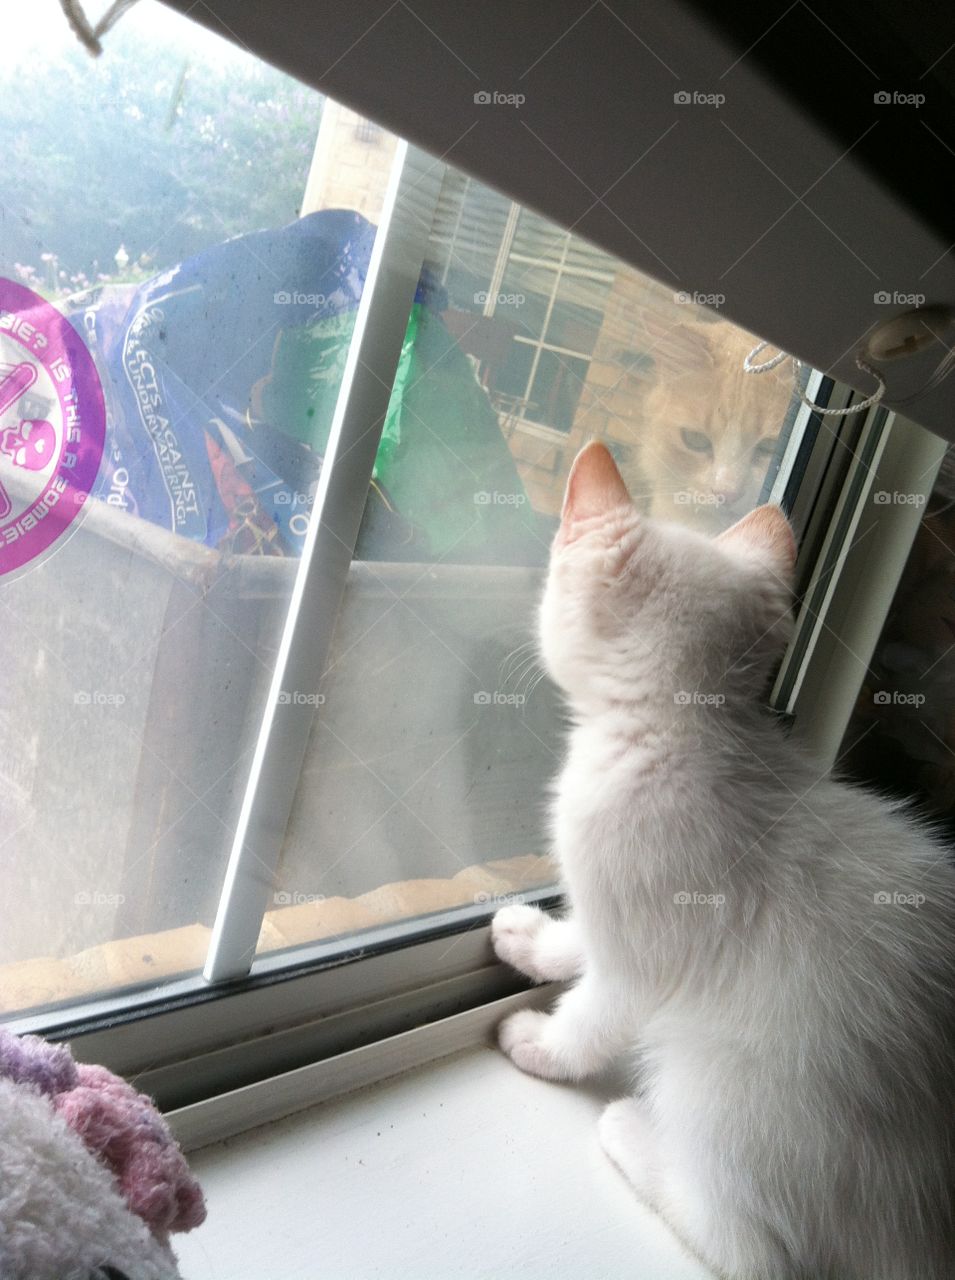 New kitten sees other cat for the first time. 